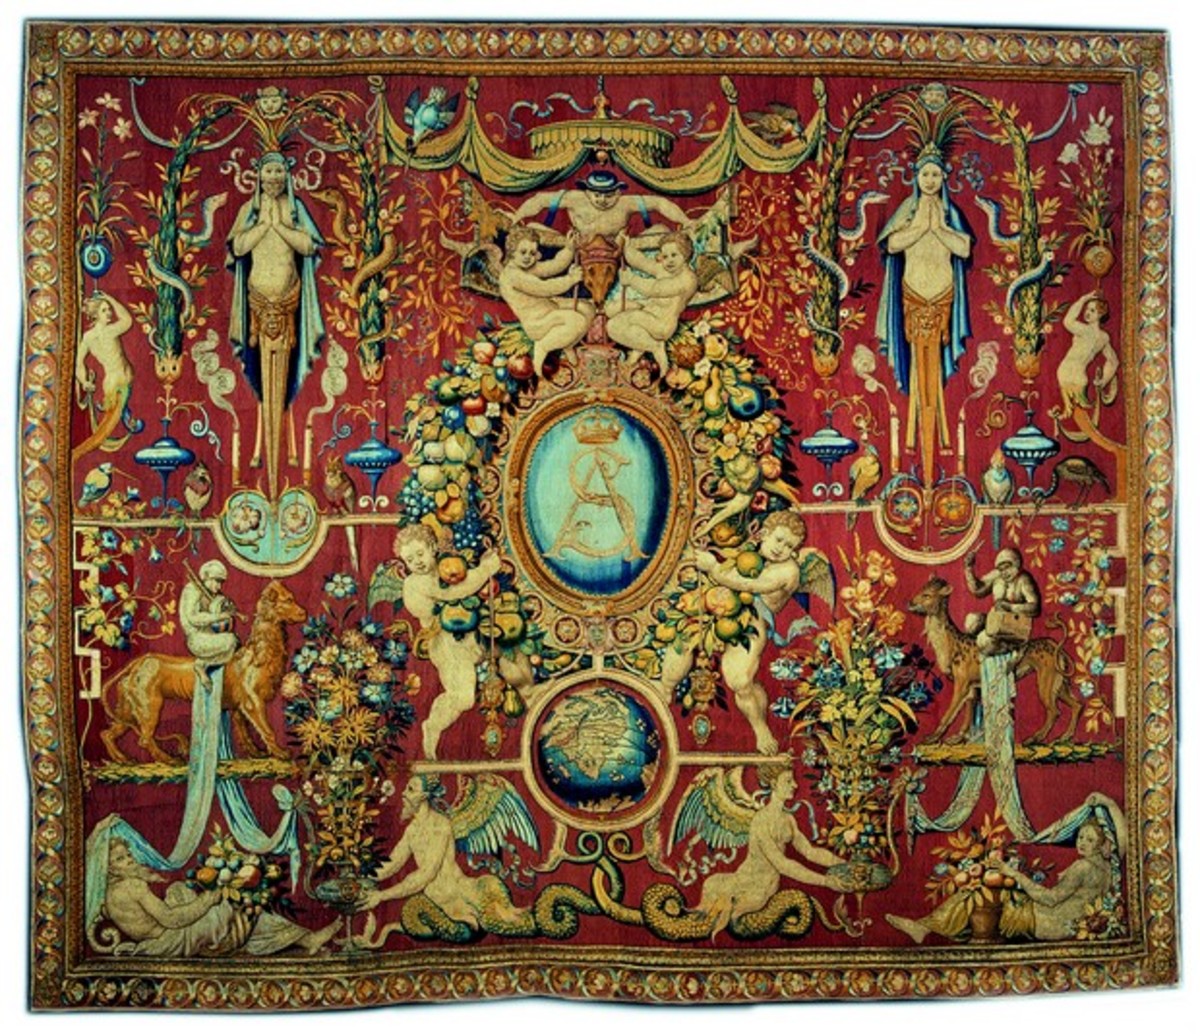 The Art and Beauty of European Tapestries